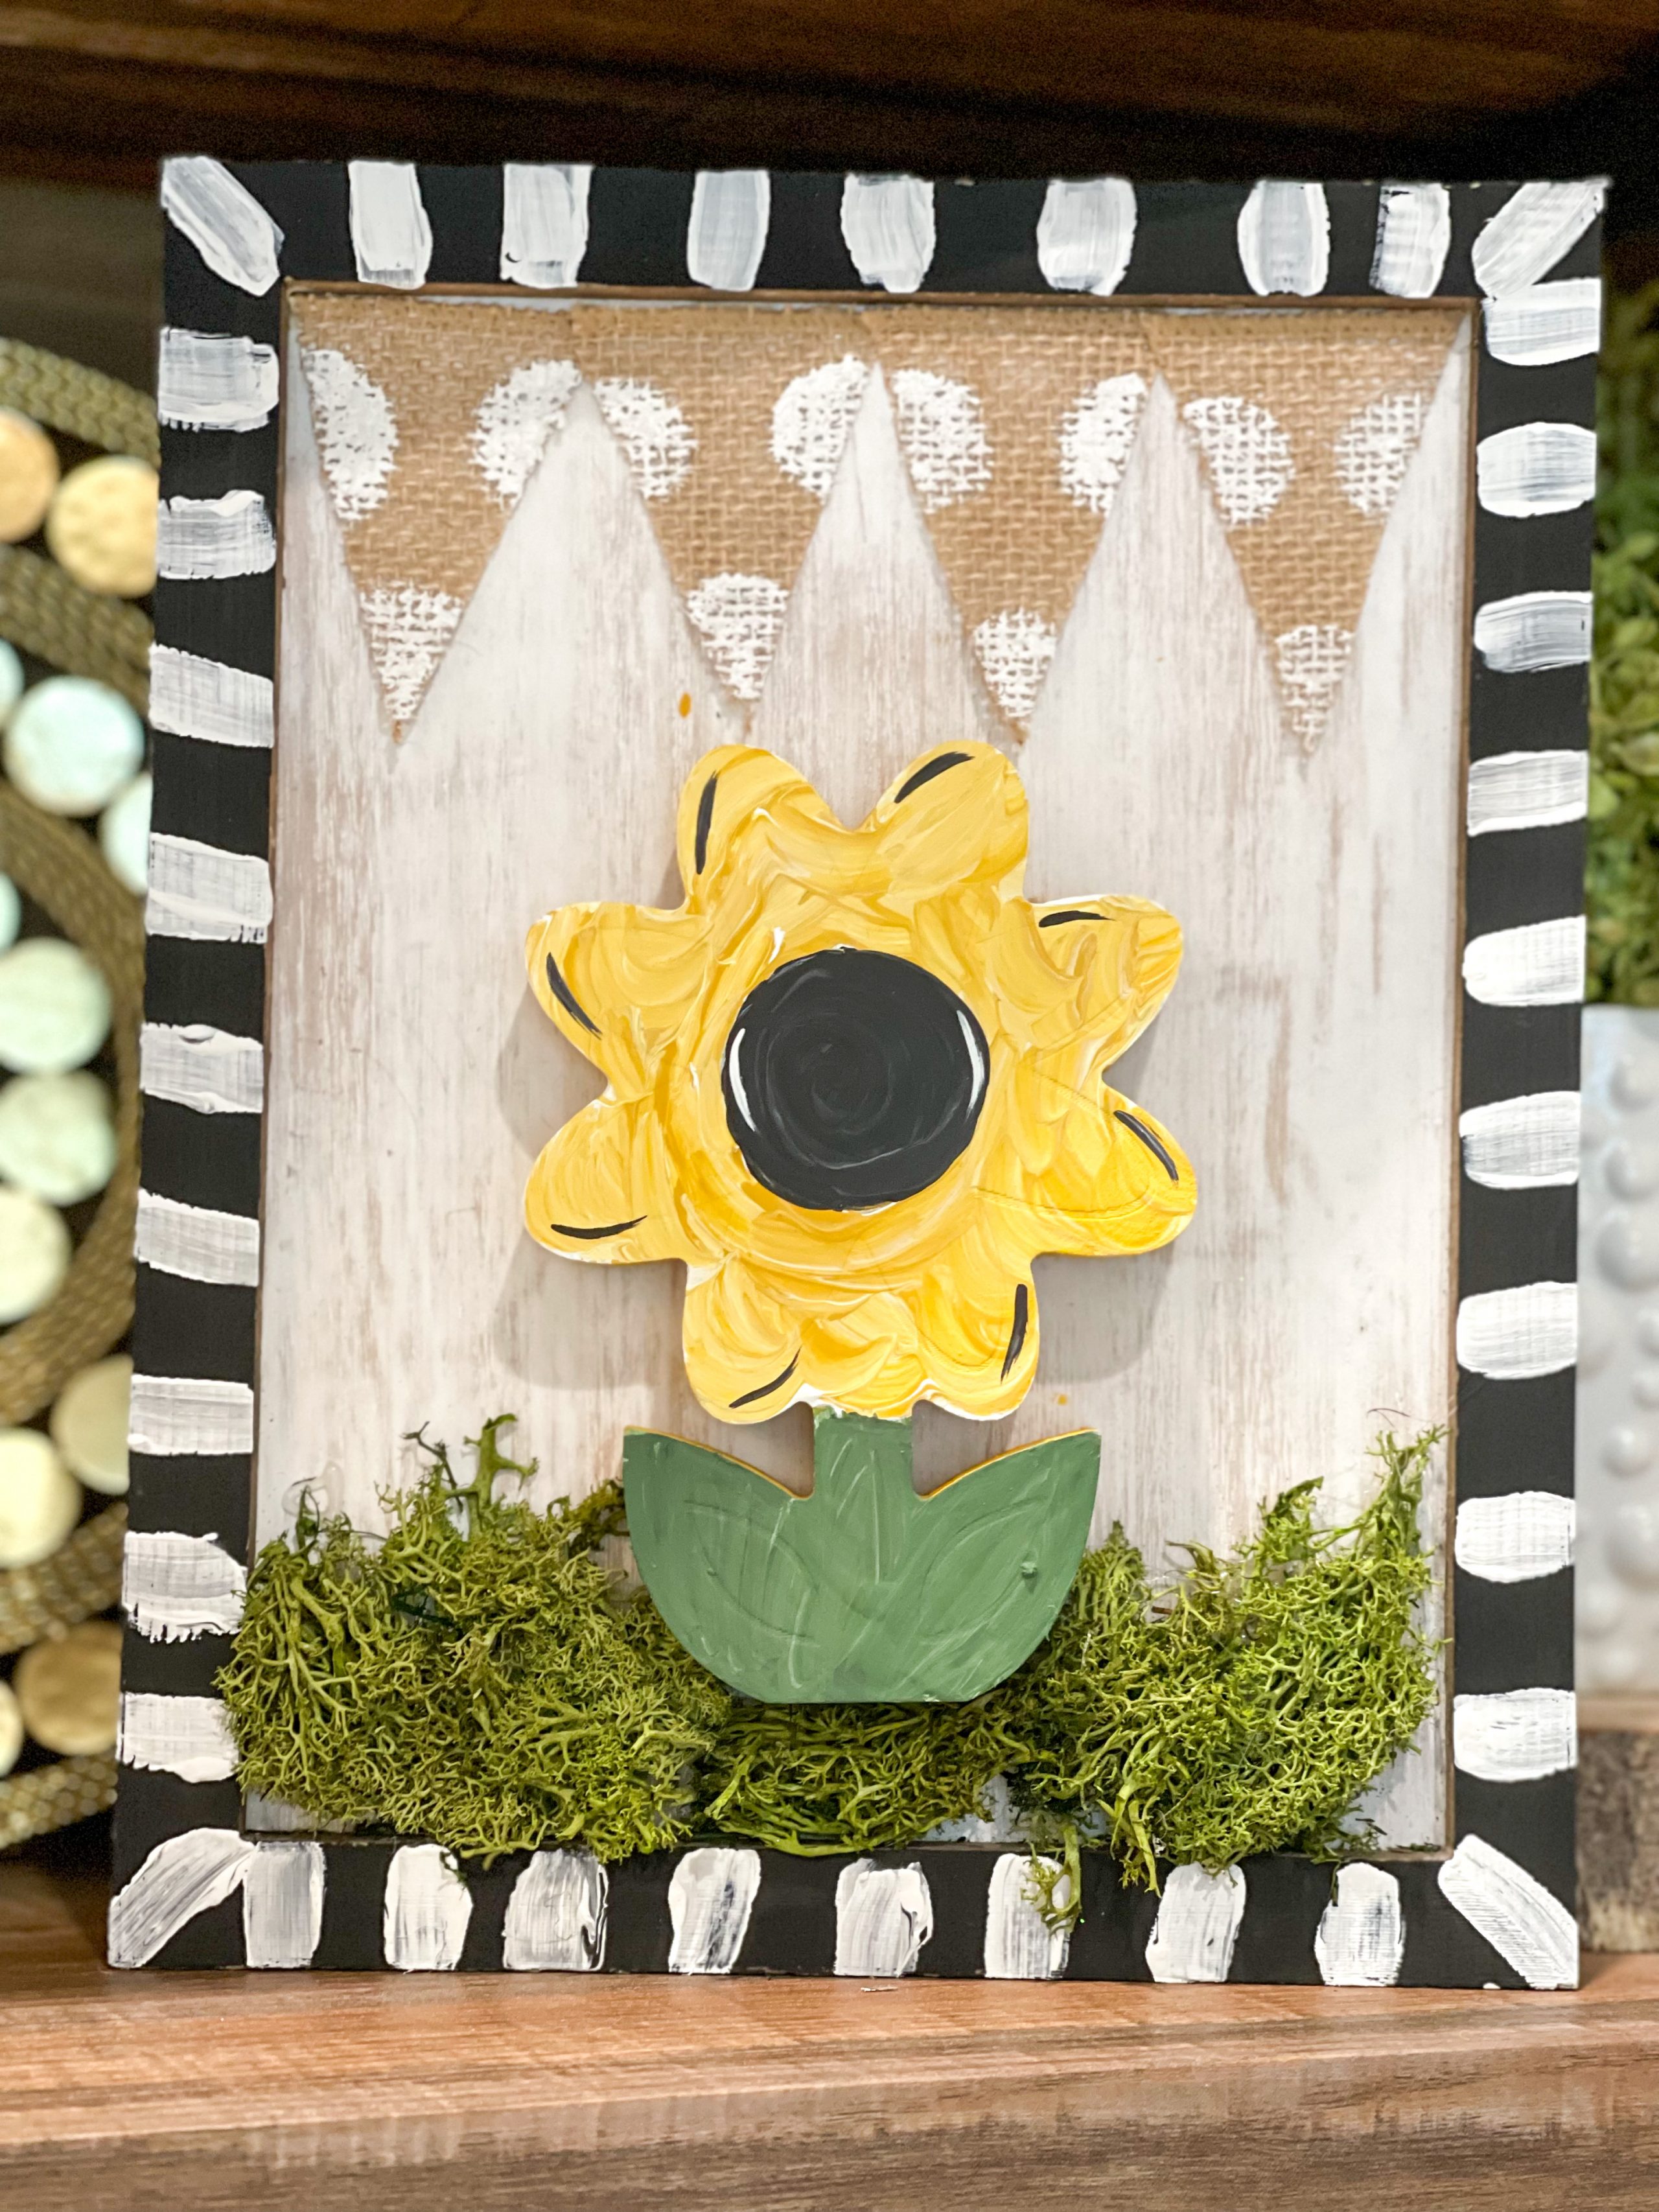 https://www.re-fabbed.com/wp-content/uploads/2022/08/painted-sunflower-sign-with-burlap-banner12.jpg